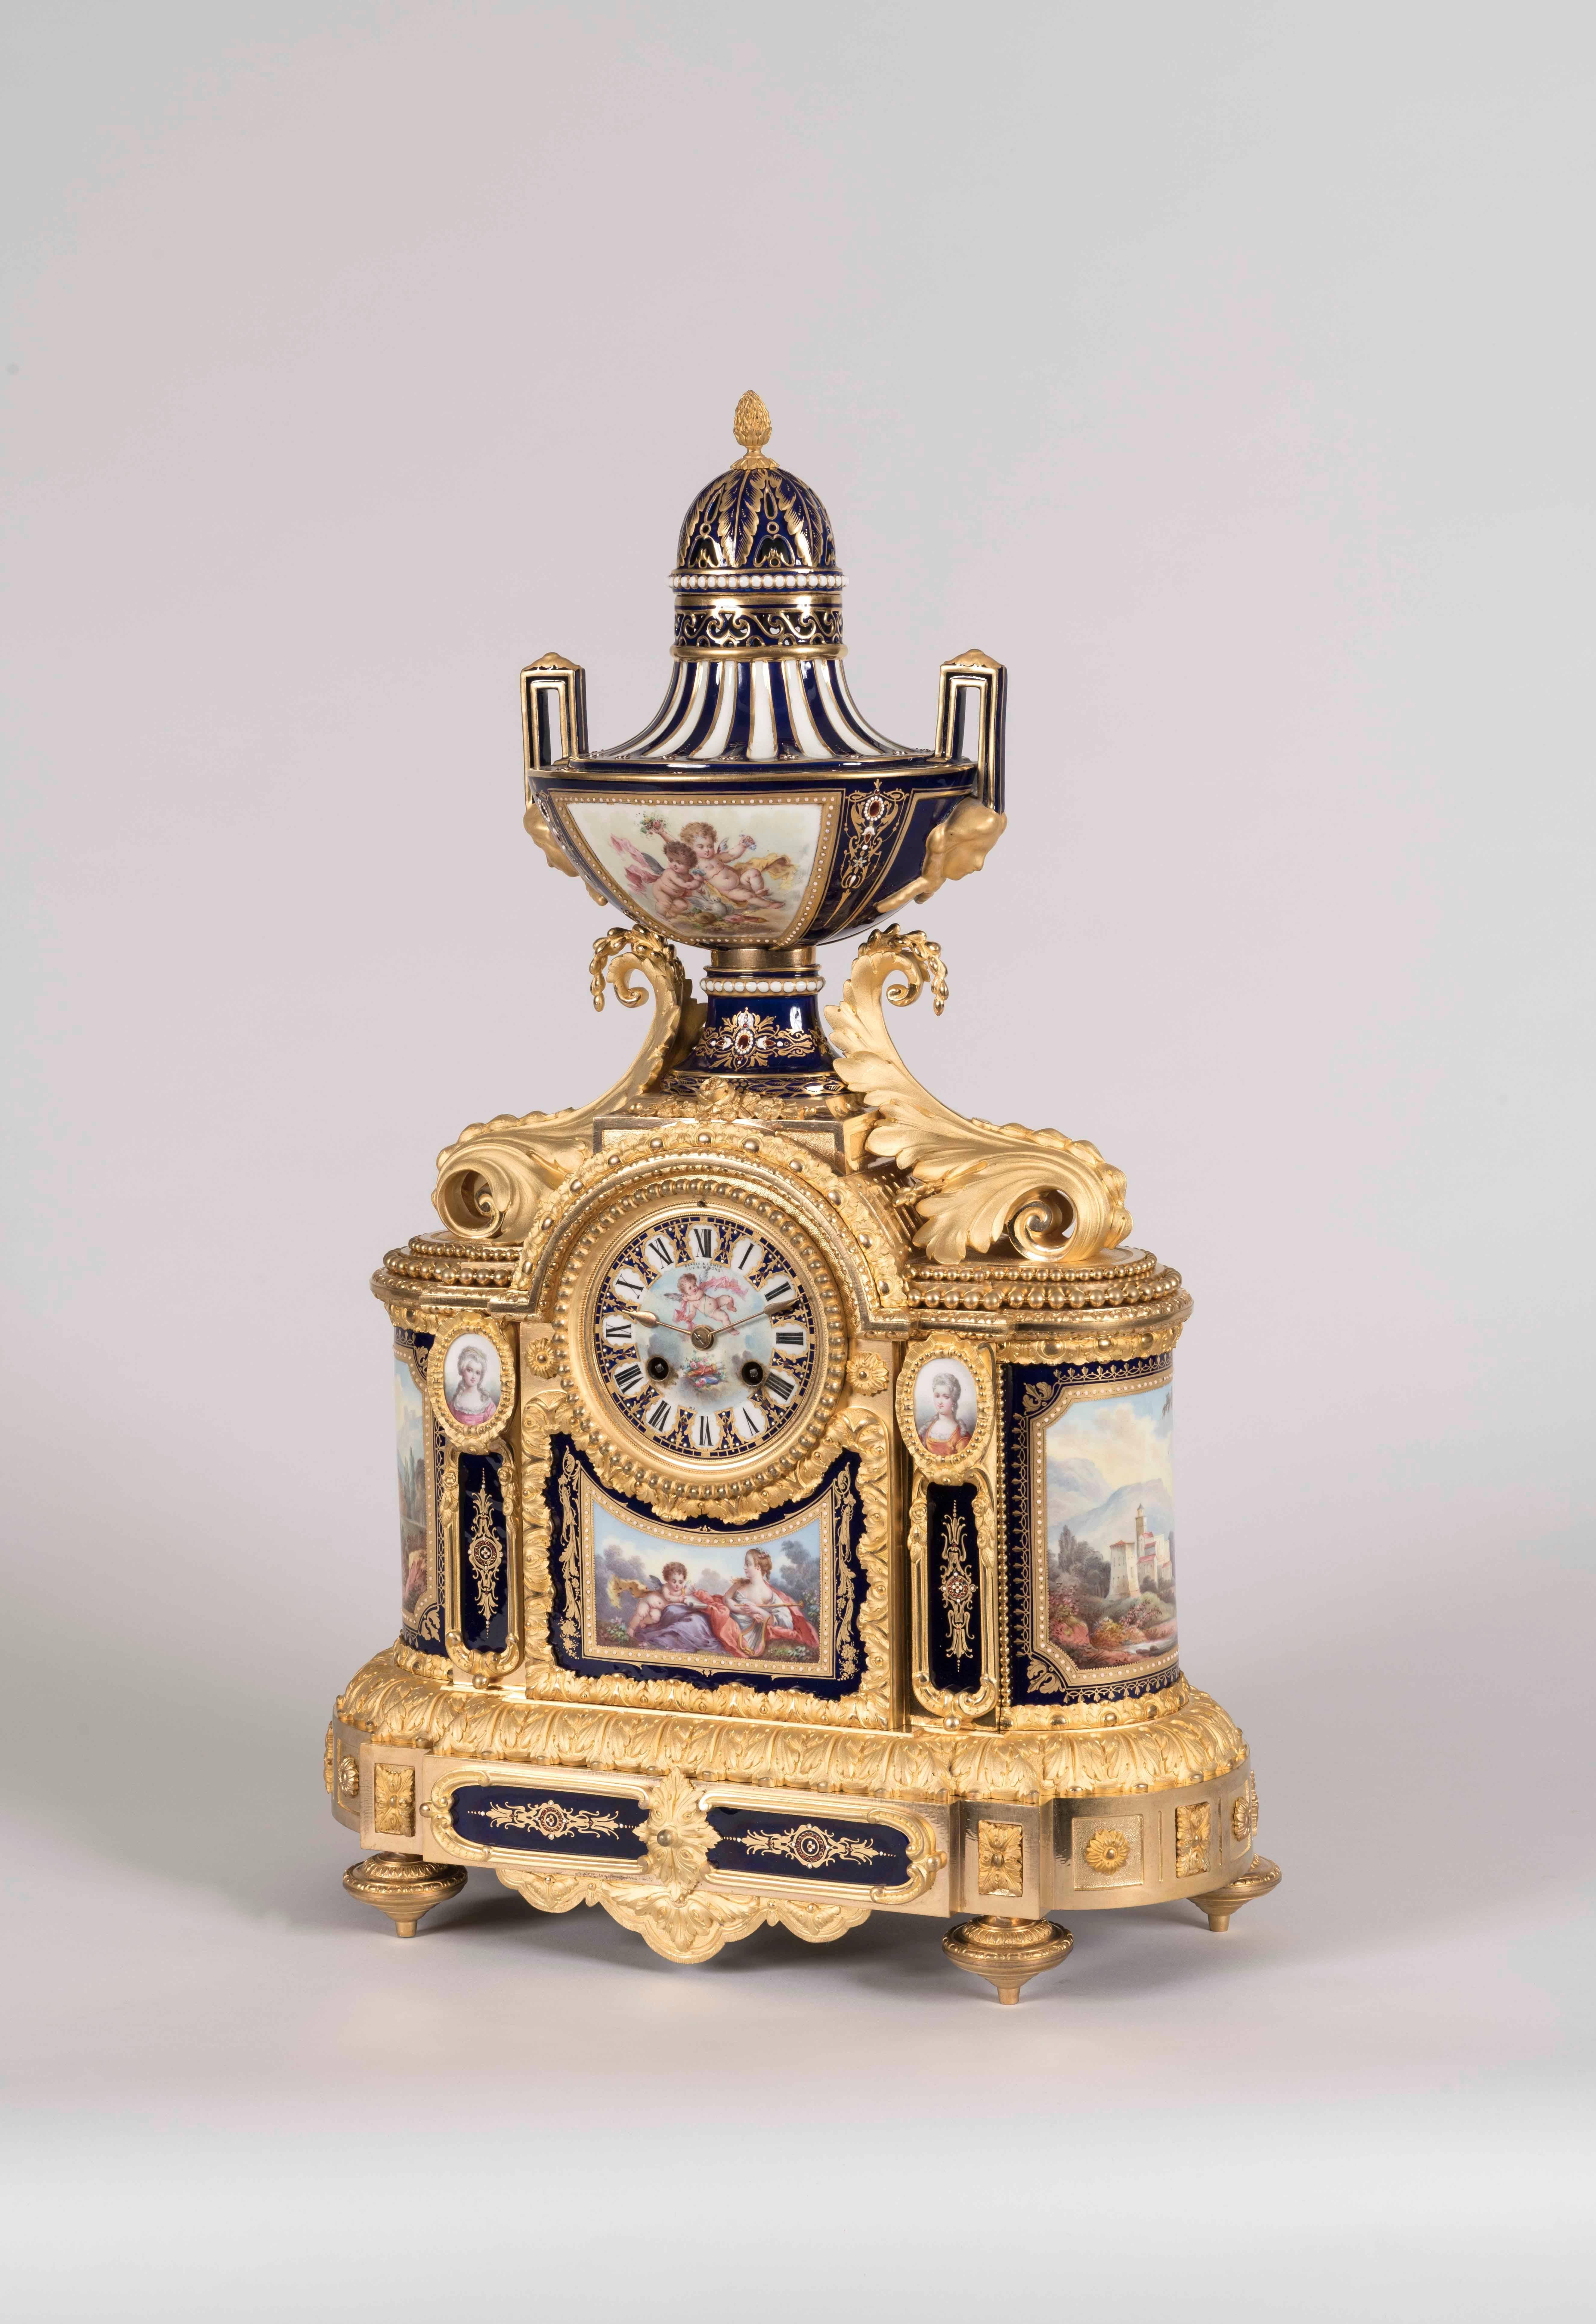 A Garniture de Chemineé in the Louis XVI taste
By Arnold & Lewis (late Simmons)

The mantle clock, and its two matched vases, are constructed in jewelled 'Sèvres' style porcelain, hand and polychrome decorated, with gilt highlights and finely